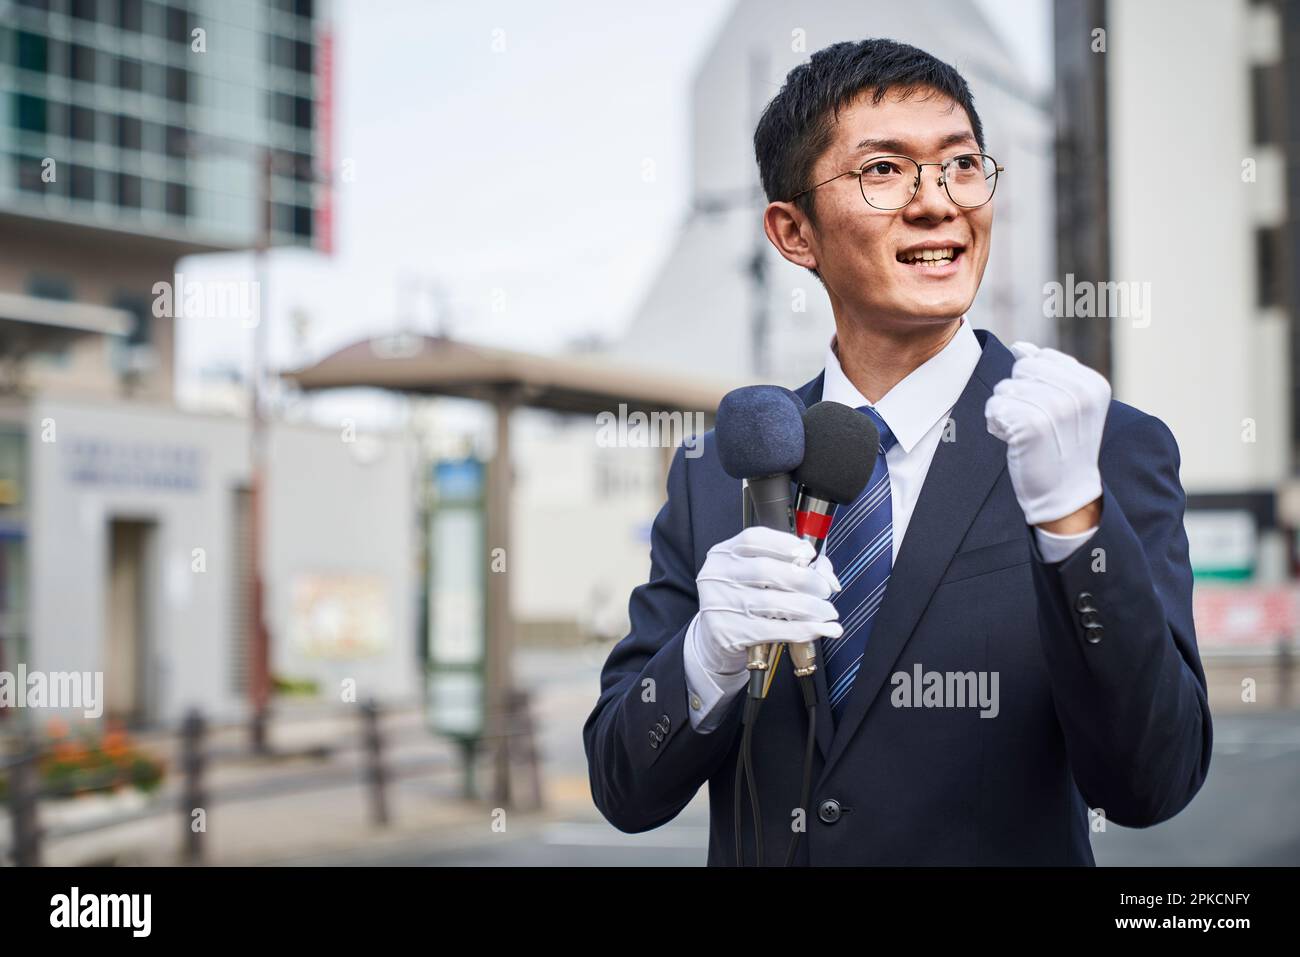 Man in suit giving a speech in the street Stock Photo